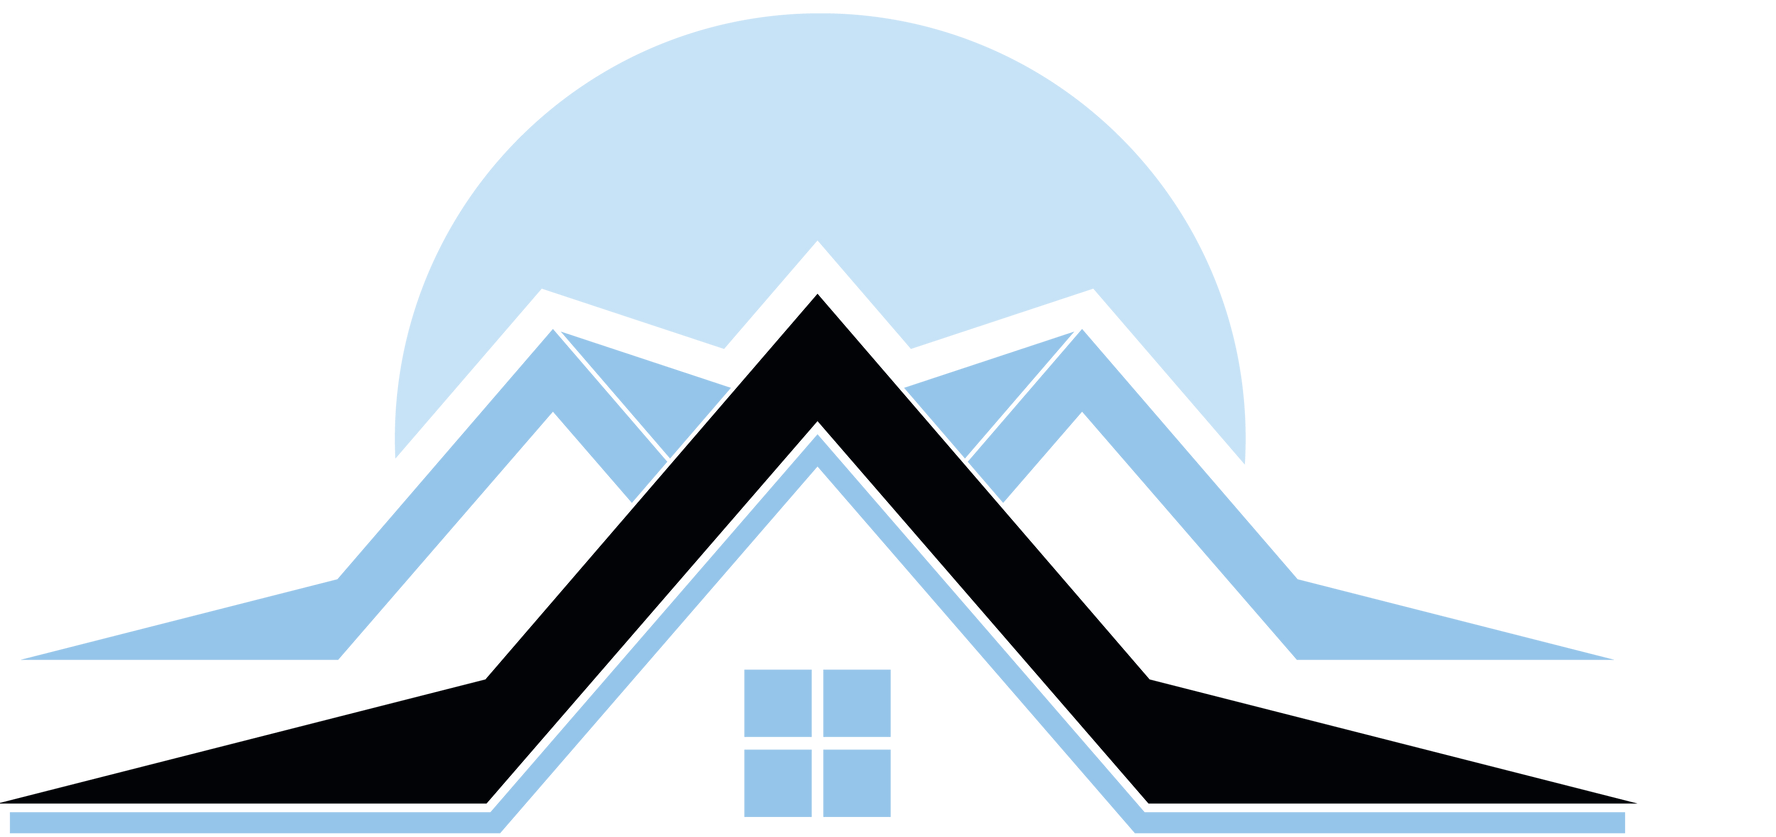 A black and white logo of a house with mountains in the background from Washington Roofing Services near Arlington WA